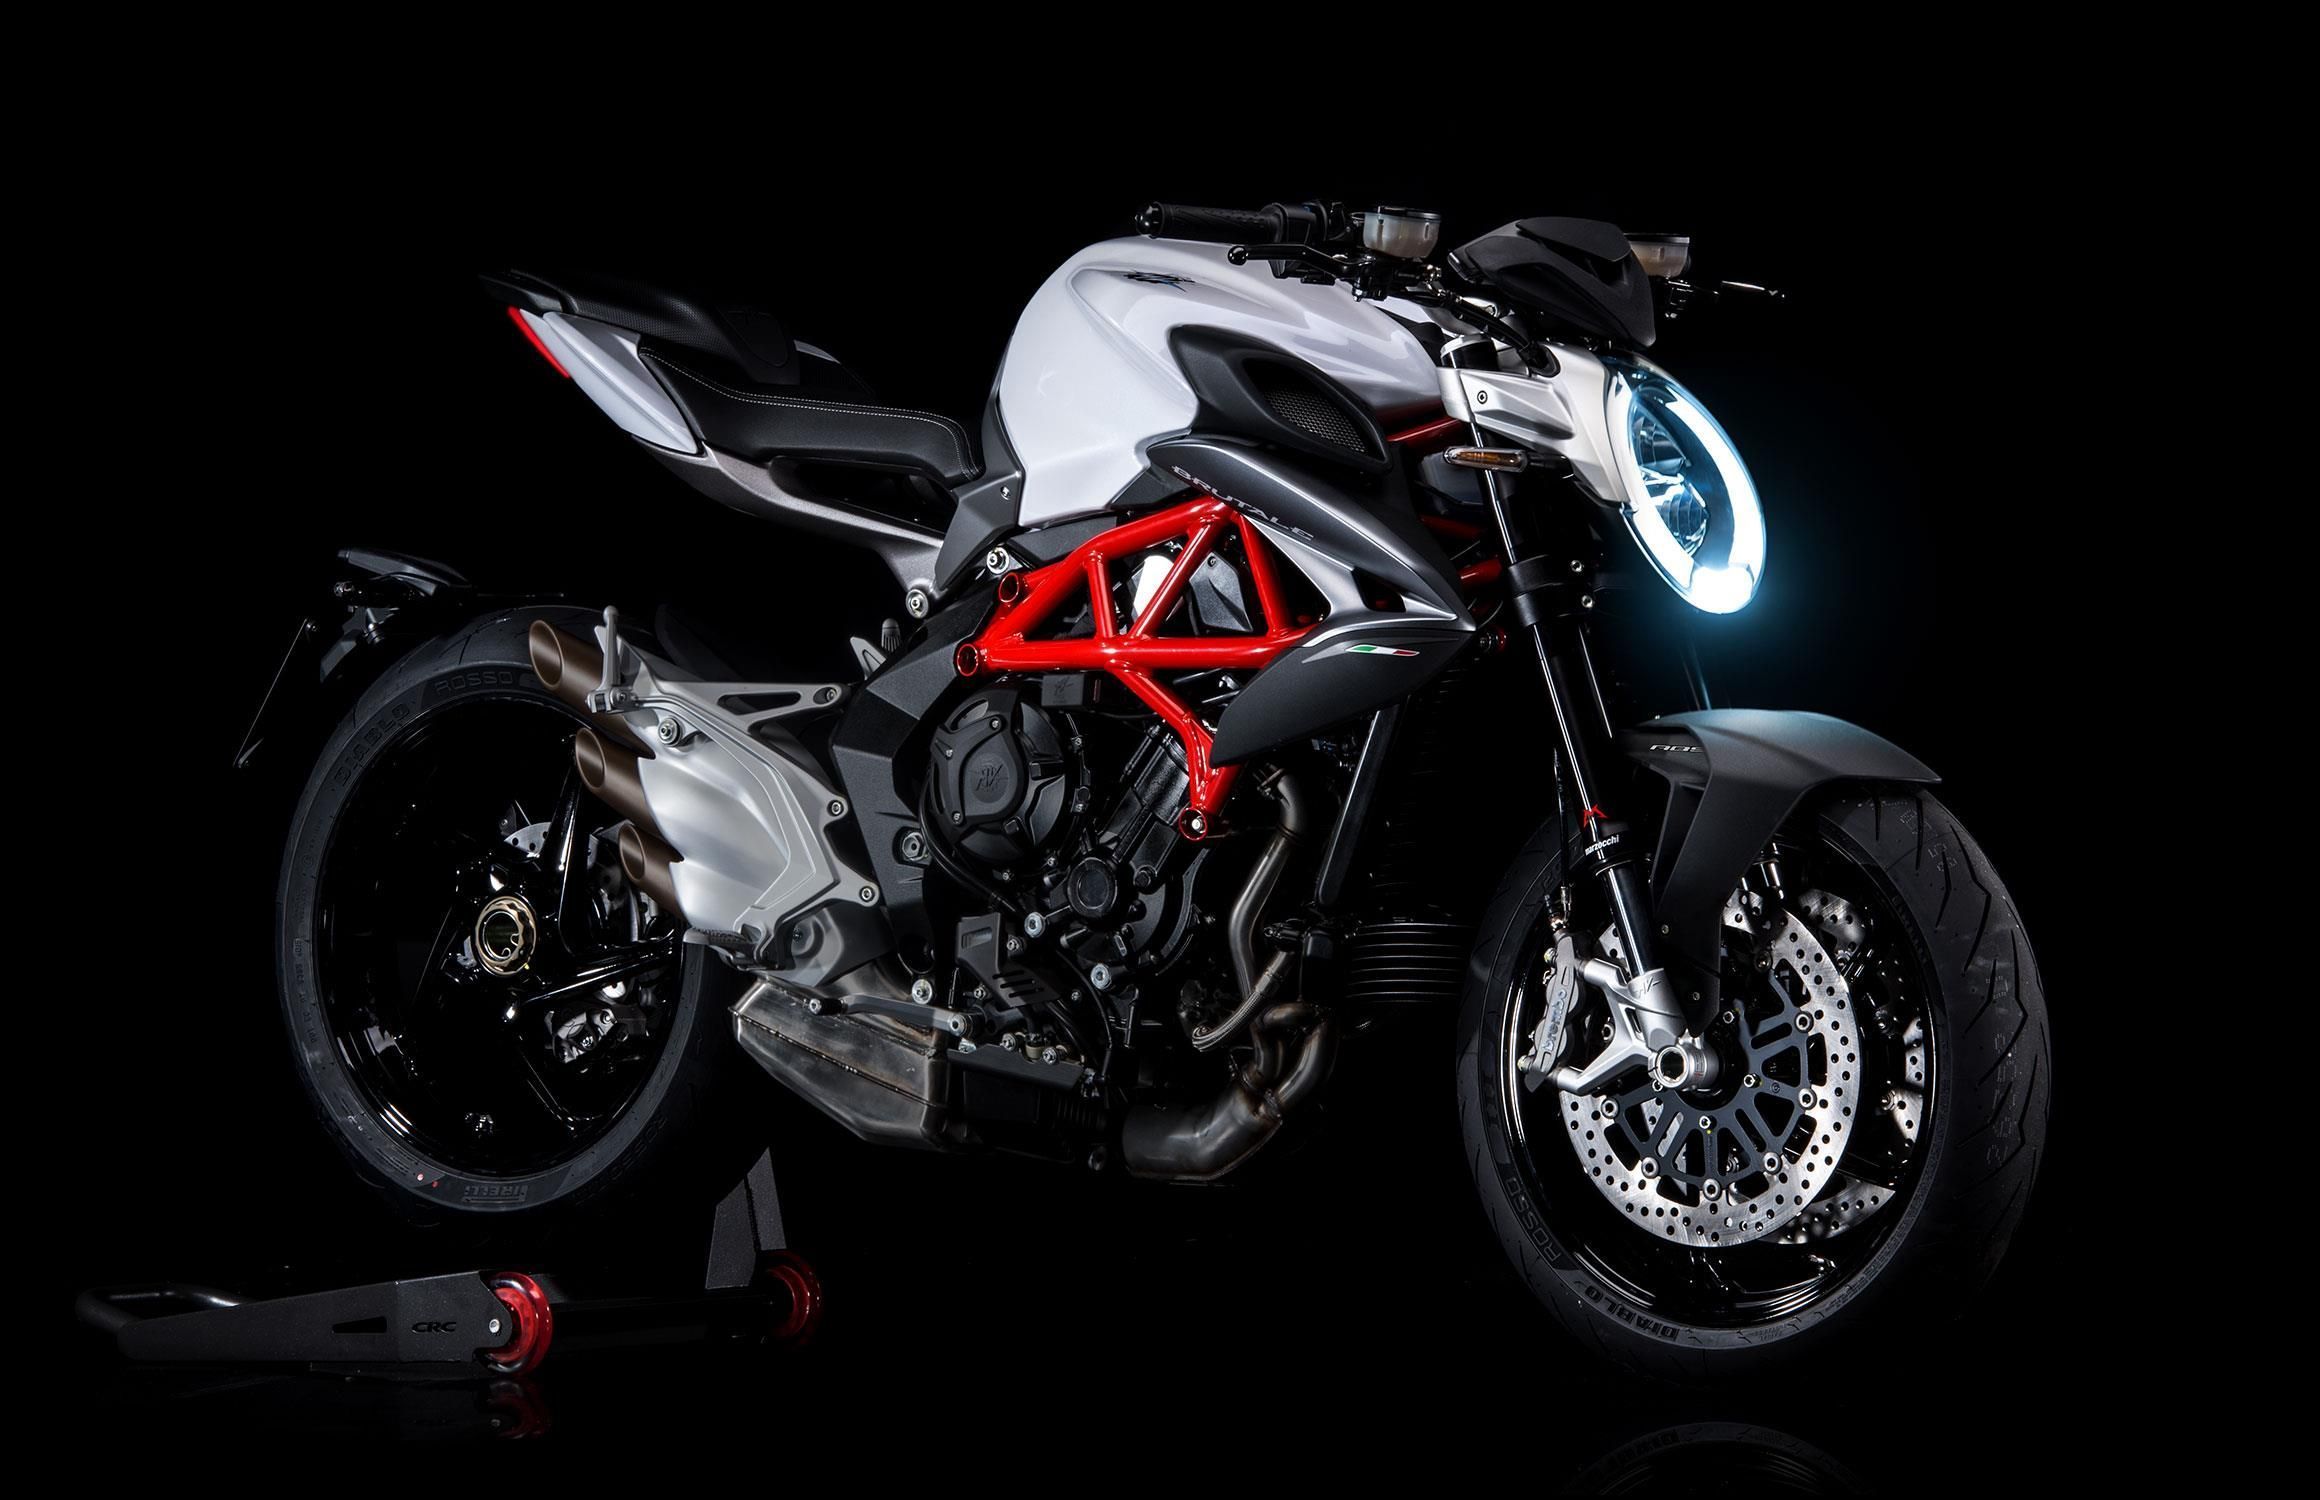 2017 MV Agusta Brutale launched in India